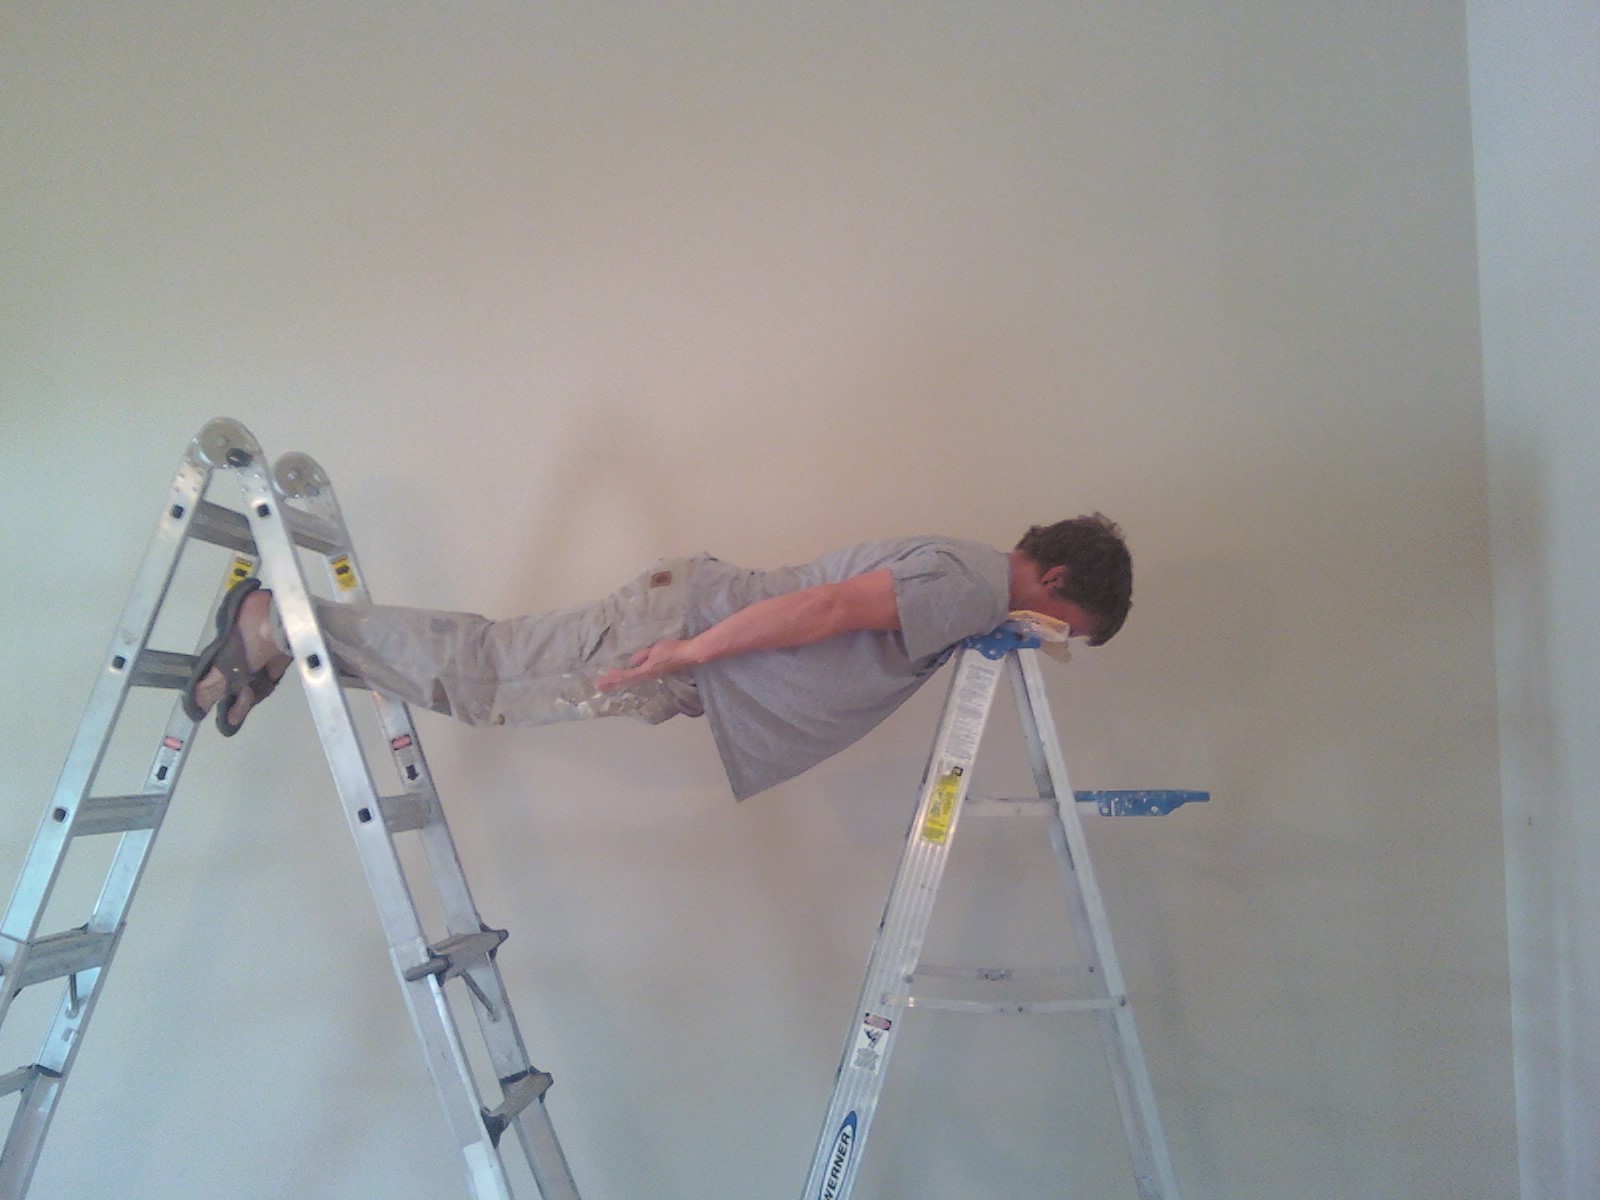 A painter planking on ladders.